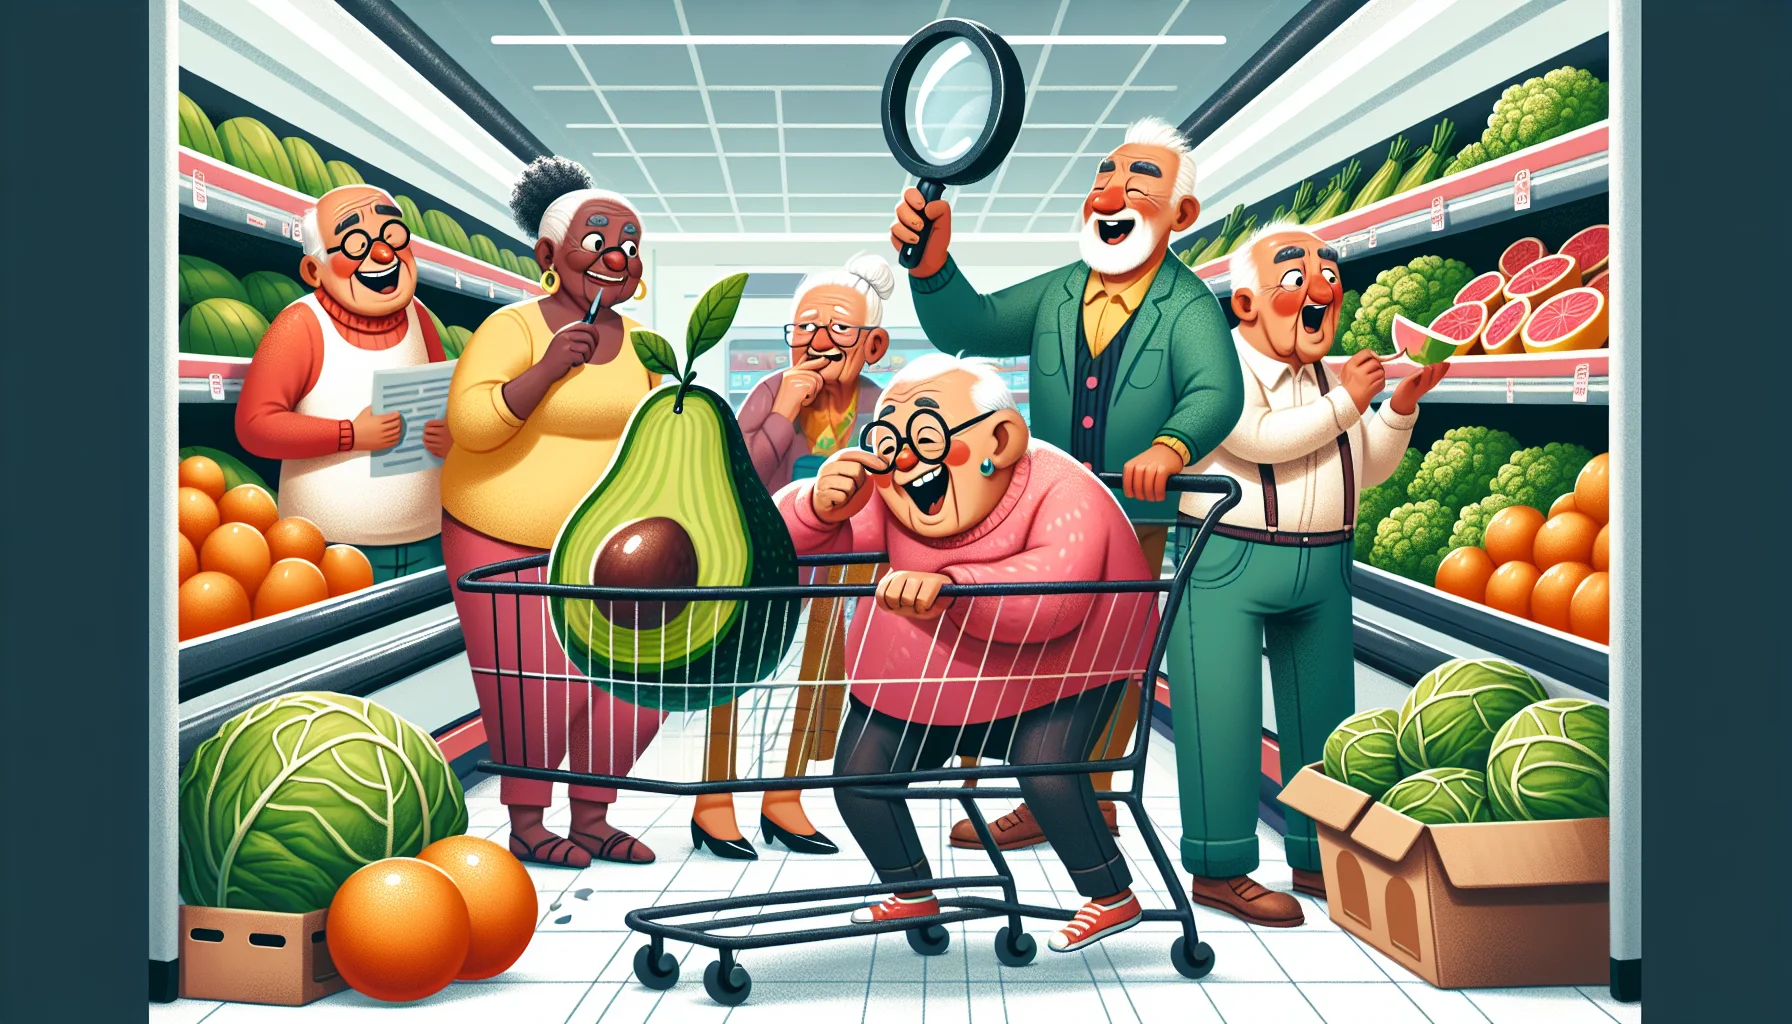 Design a lighthearted and realistic scene in a produce section of a supermarket. A group of animated elderly individuals of multiple races including Caucasian, African American, Asian and Hispanic are shopping for their groceries. One elderly lady, African-American, is scrutinizing an avocado with a magnifying glass, puzzling over its wellness benefits. Another senior gentleman of Asian descent is humorously attempting to balance a tower of grapefruit in his shopping cart. A cheerful elderly Hispanic couple is comparing the size of two gigantic cabbages, while a Caucasian senior man is comically struggling to reach for a bag of kale on a higher shelf, all engaged in a quest for healthy eating.